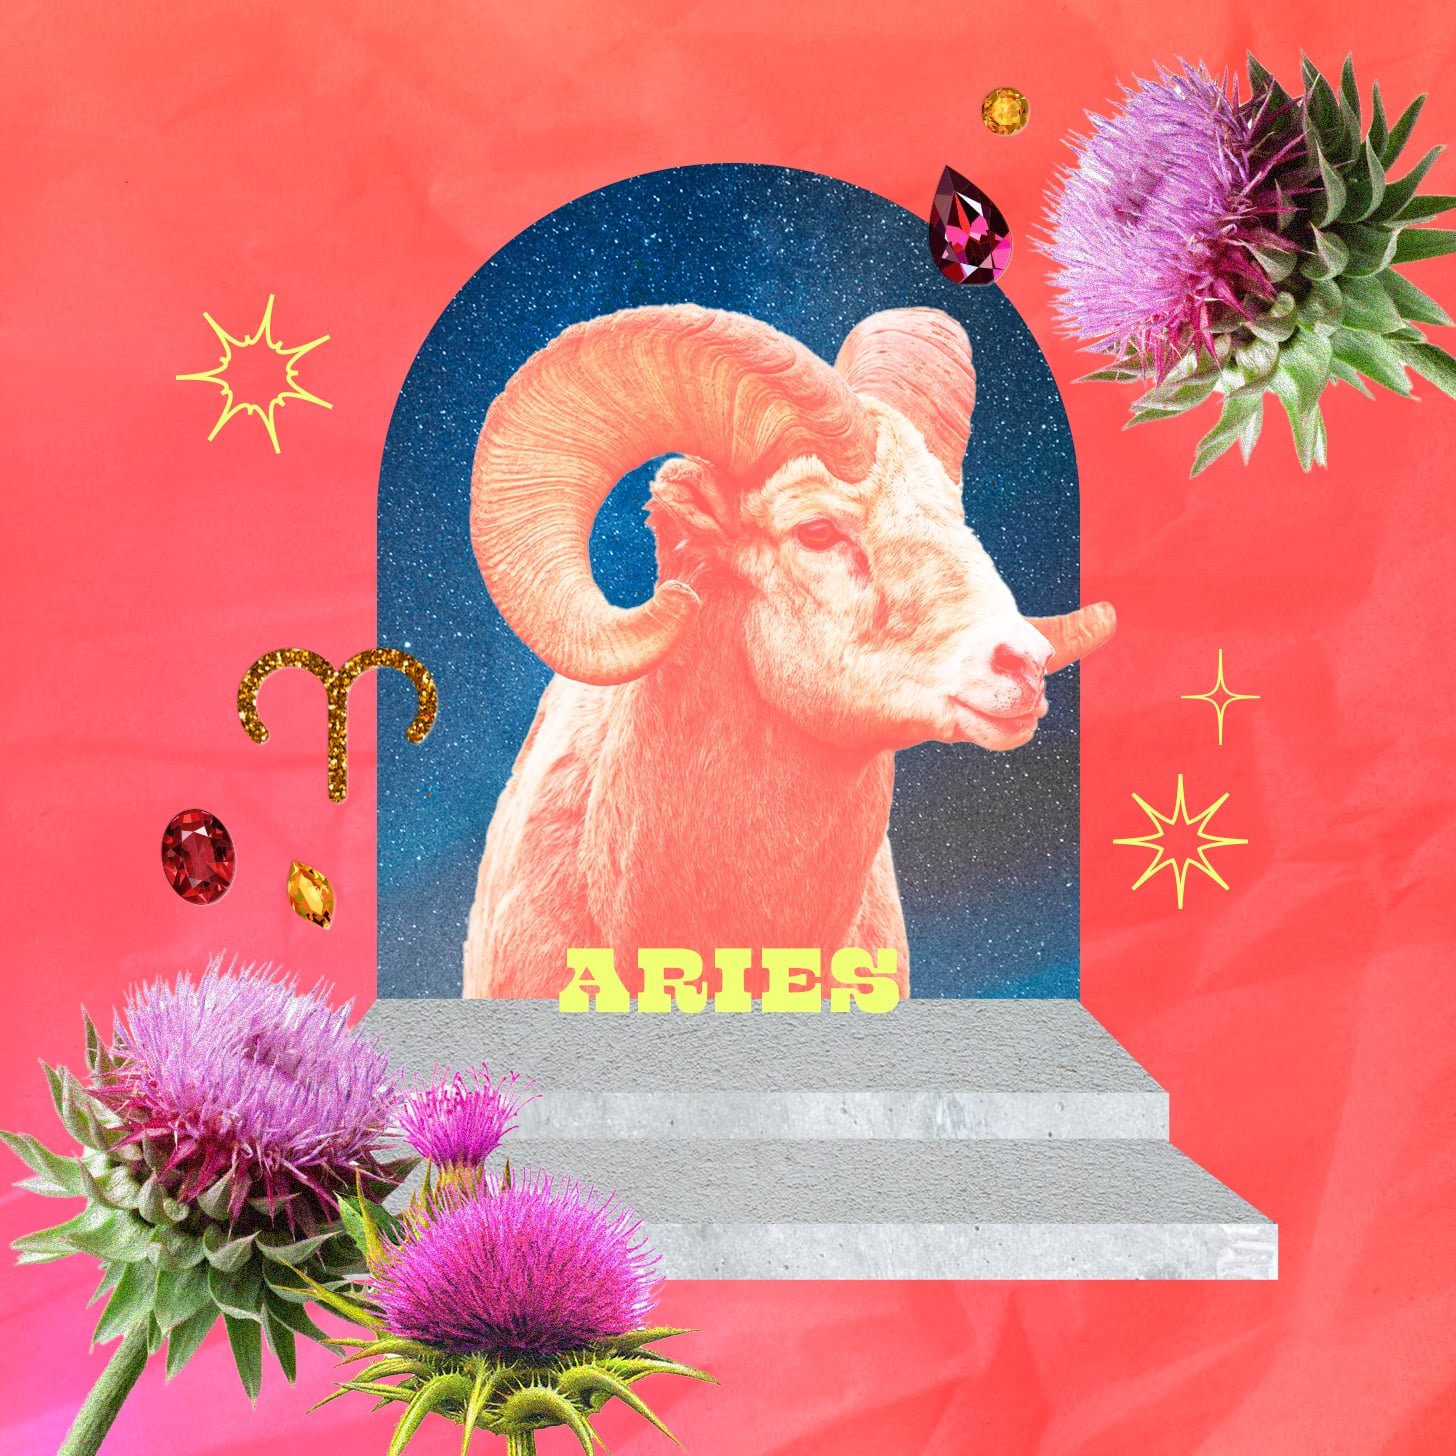 Aries weekly horoscope for December 11, 2022